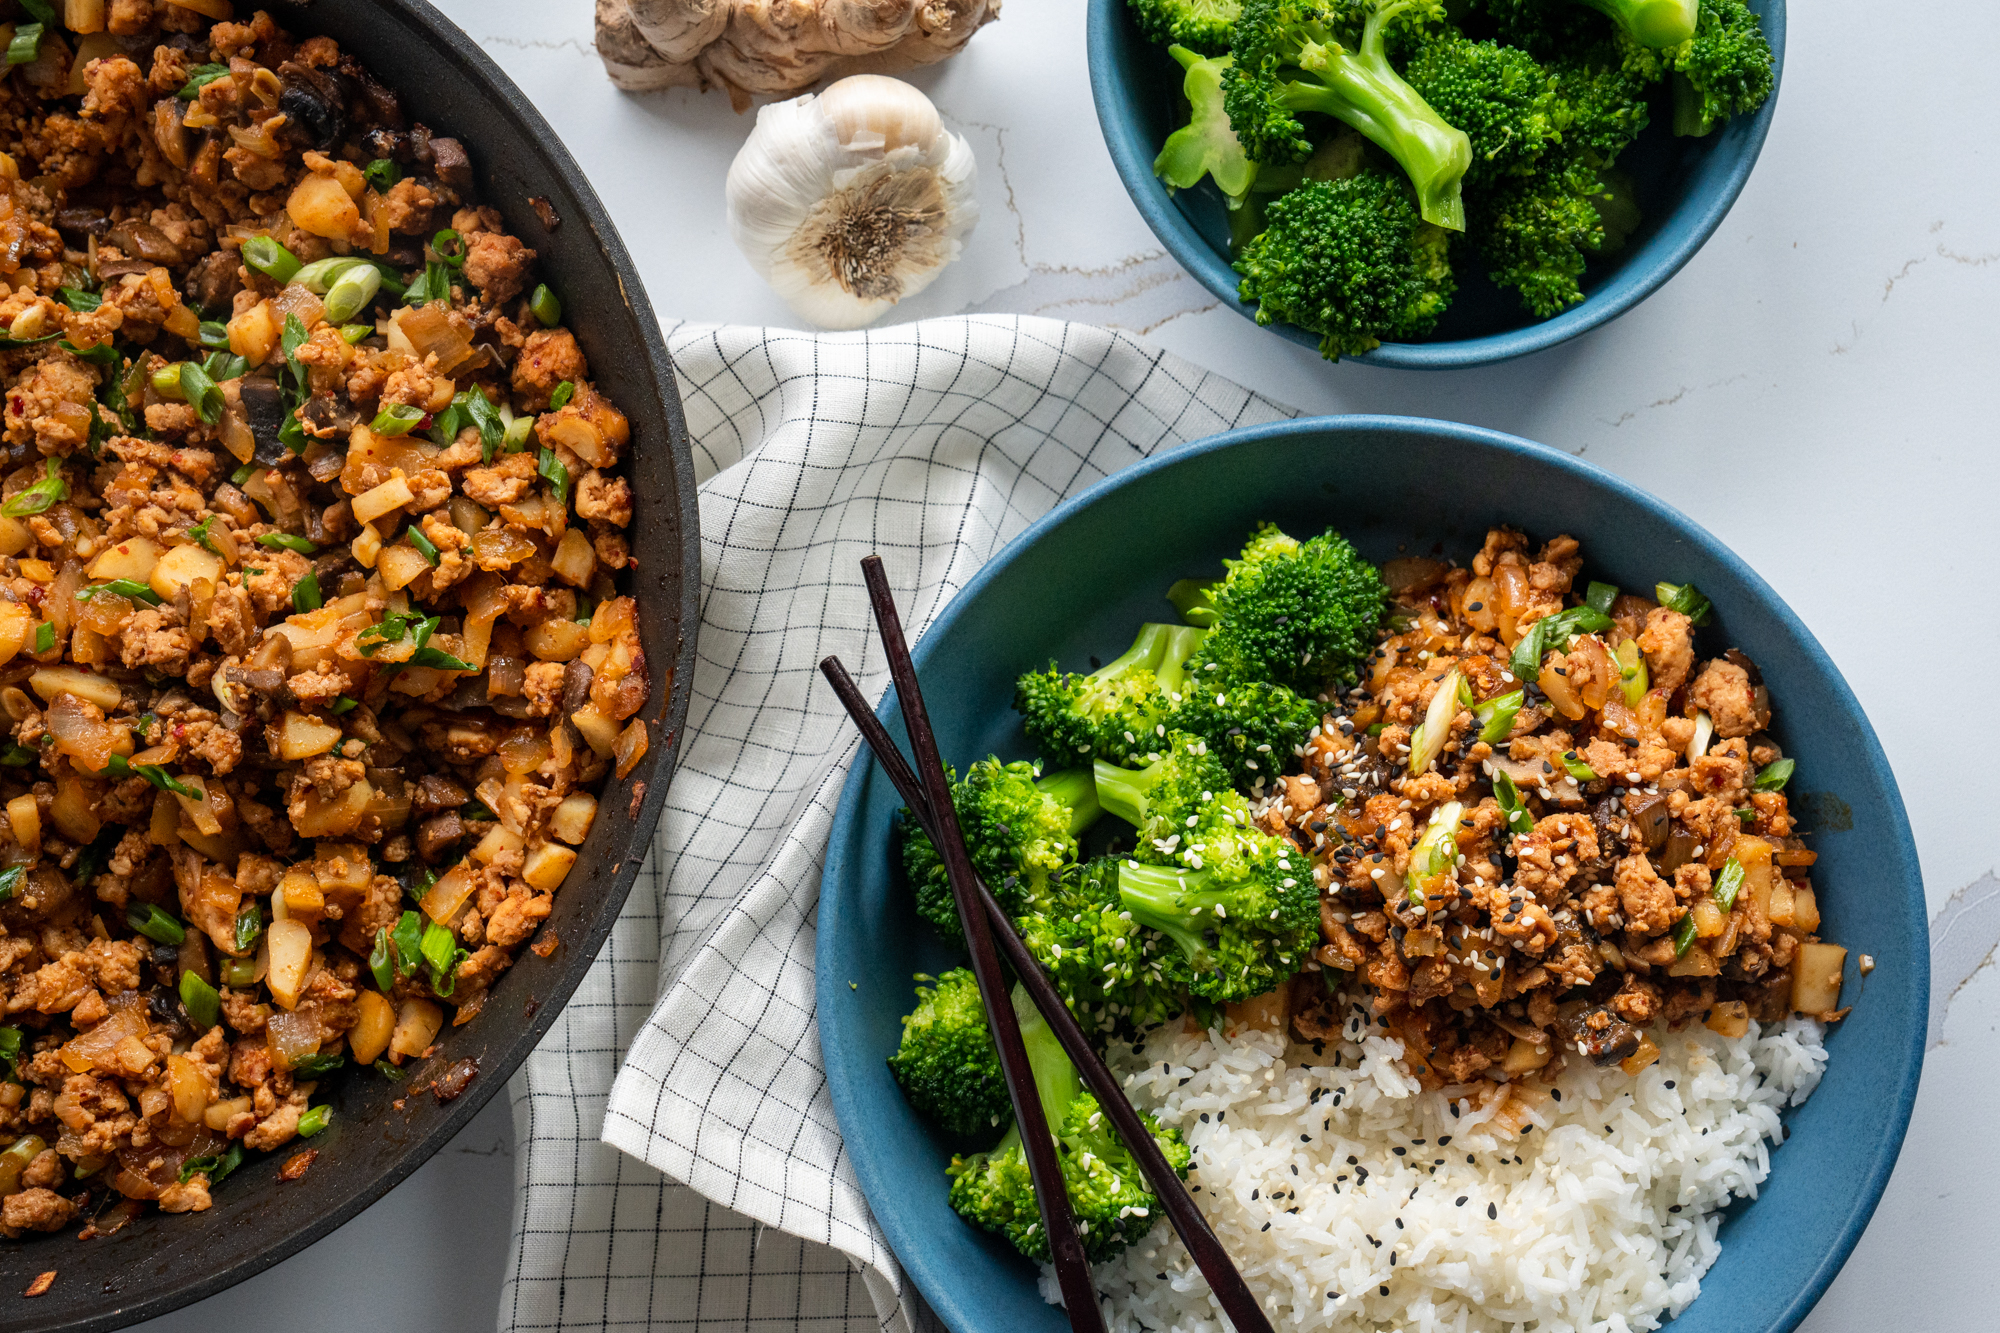 A bowl of rice, ginger ground chicken and broccoli with an Asian theme.